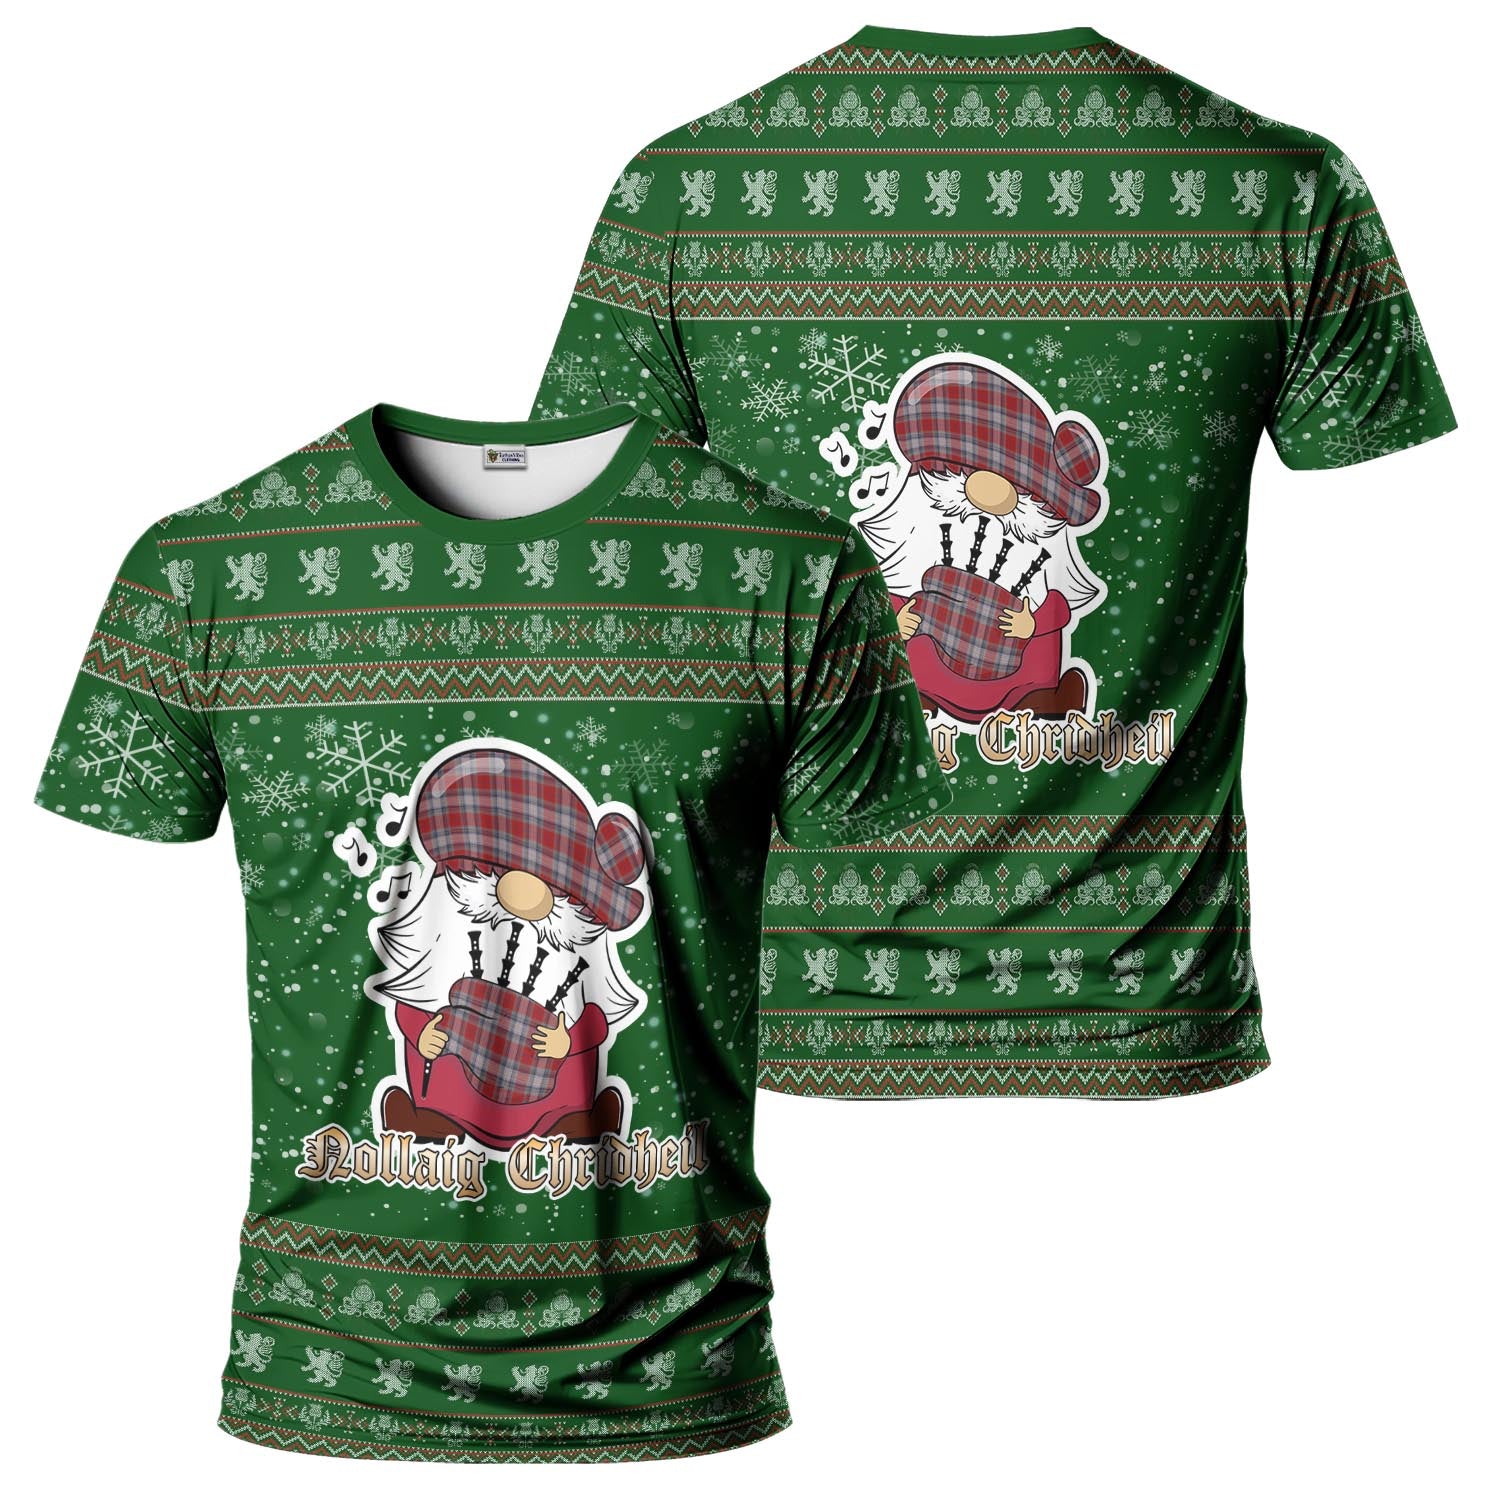 Warden Clan Christmas Family T-Shirt with Funny Gnome Playing Bagpipes Men's Shirt Green - Tartanvibesclothing